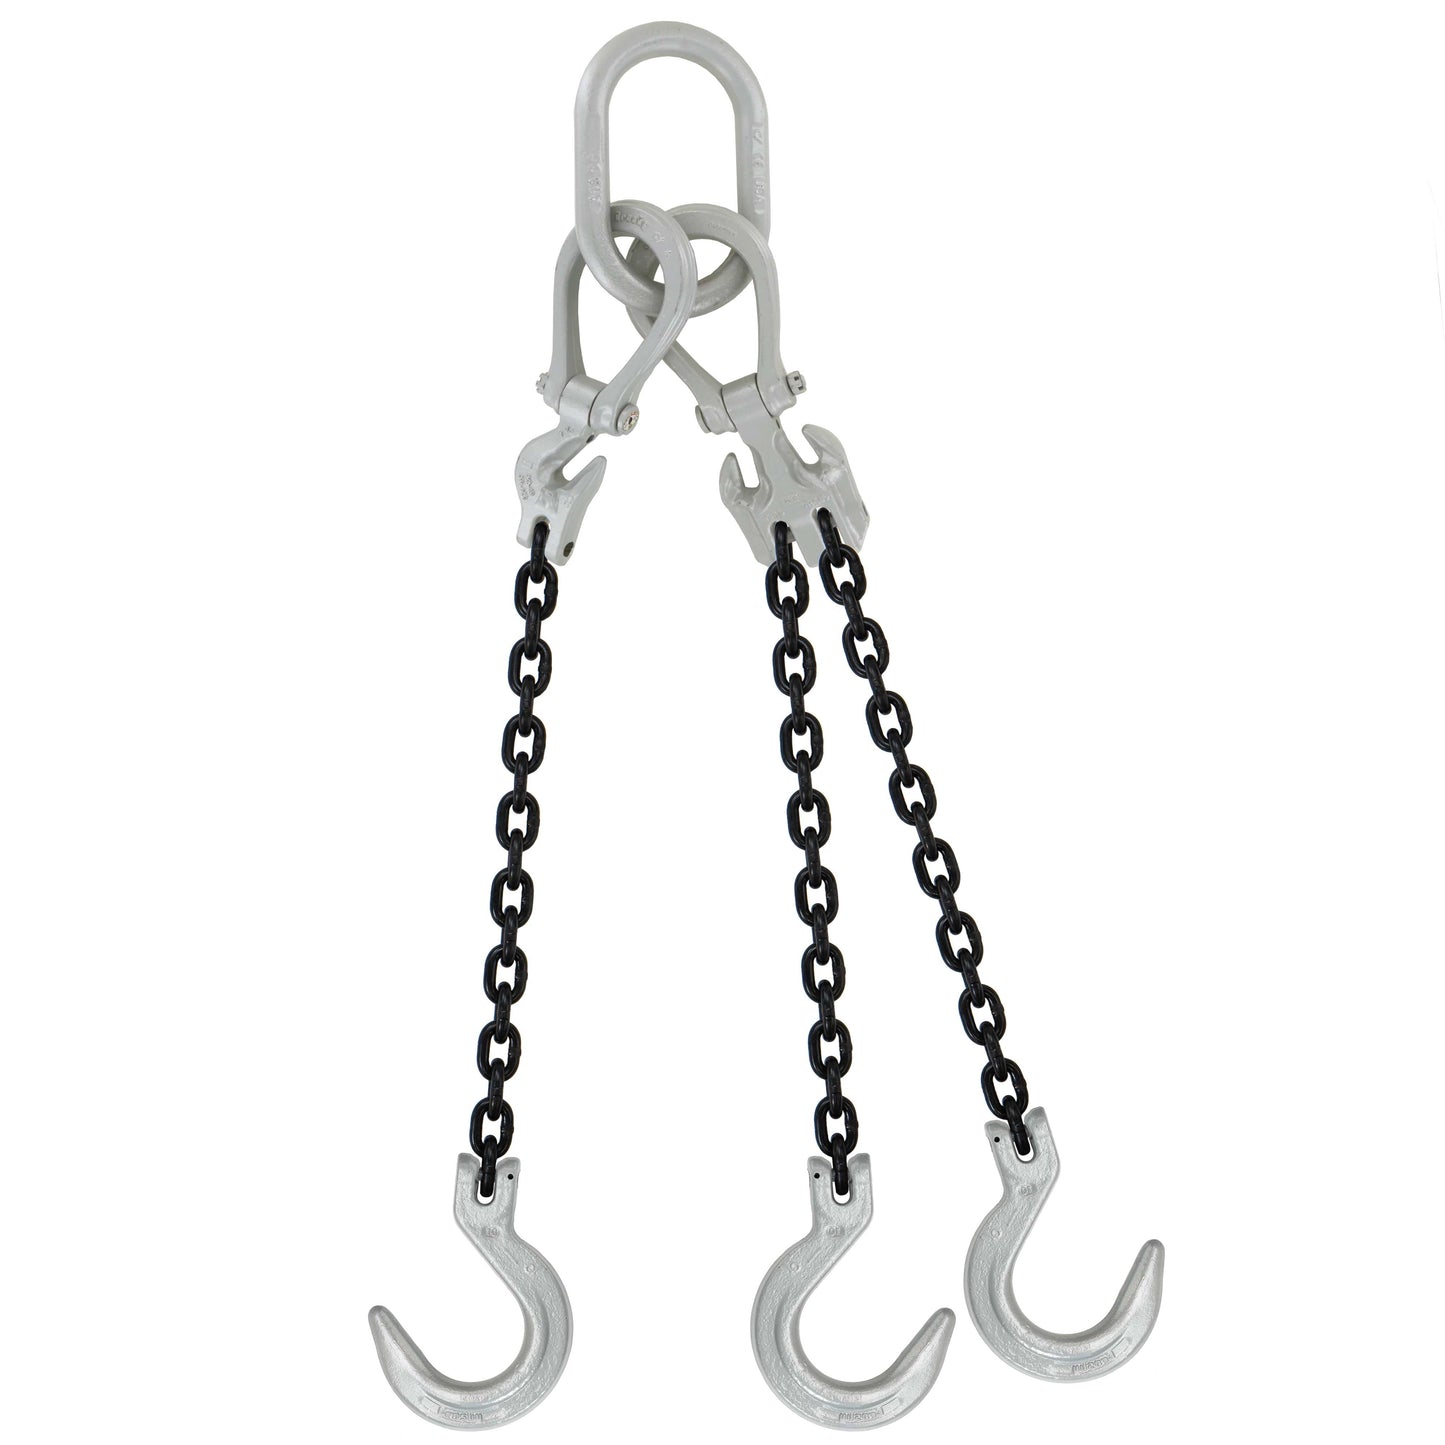 38 inch x 10 foot Domestic Adjustable 3 Leg Chain Sling w Crosby Foundry Hooks Grade 100 image 1 of 2